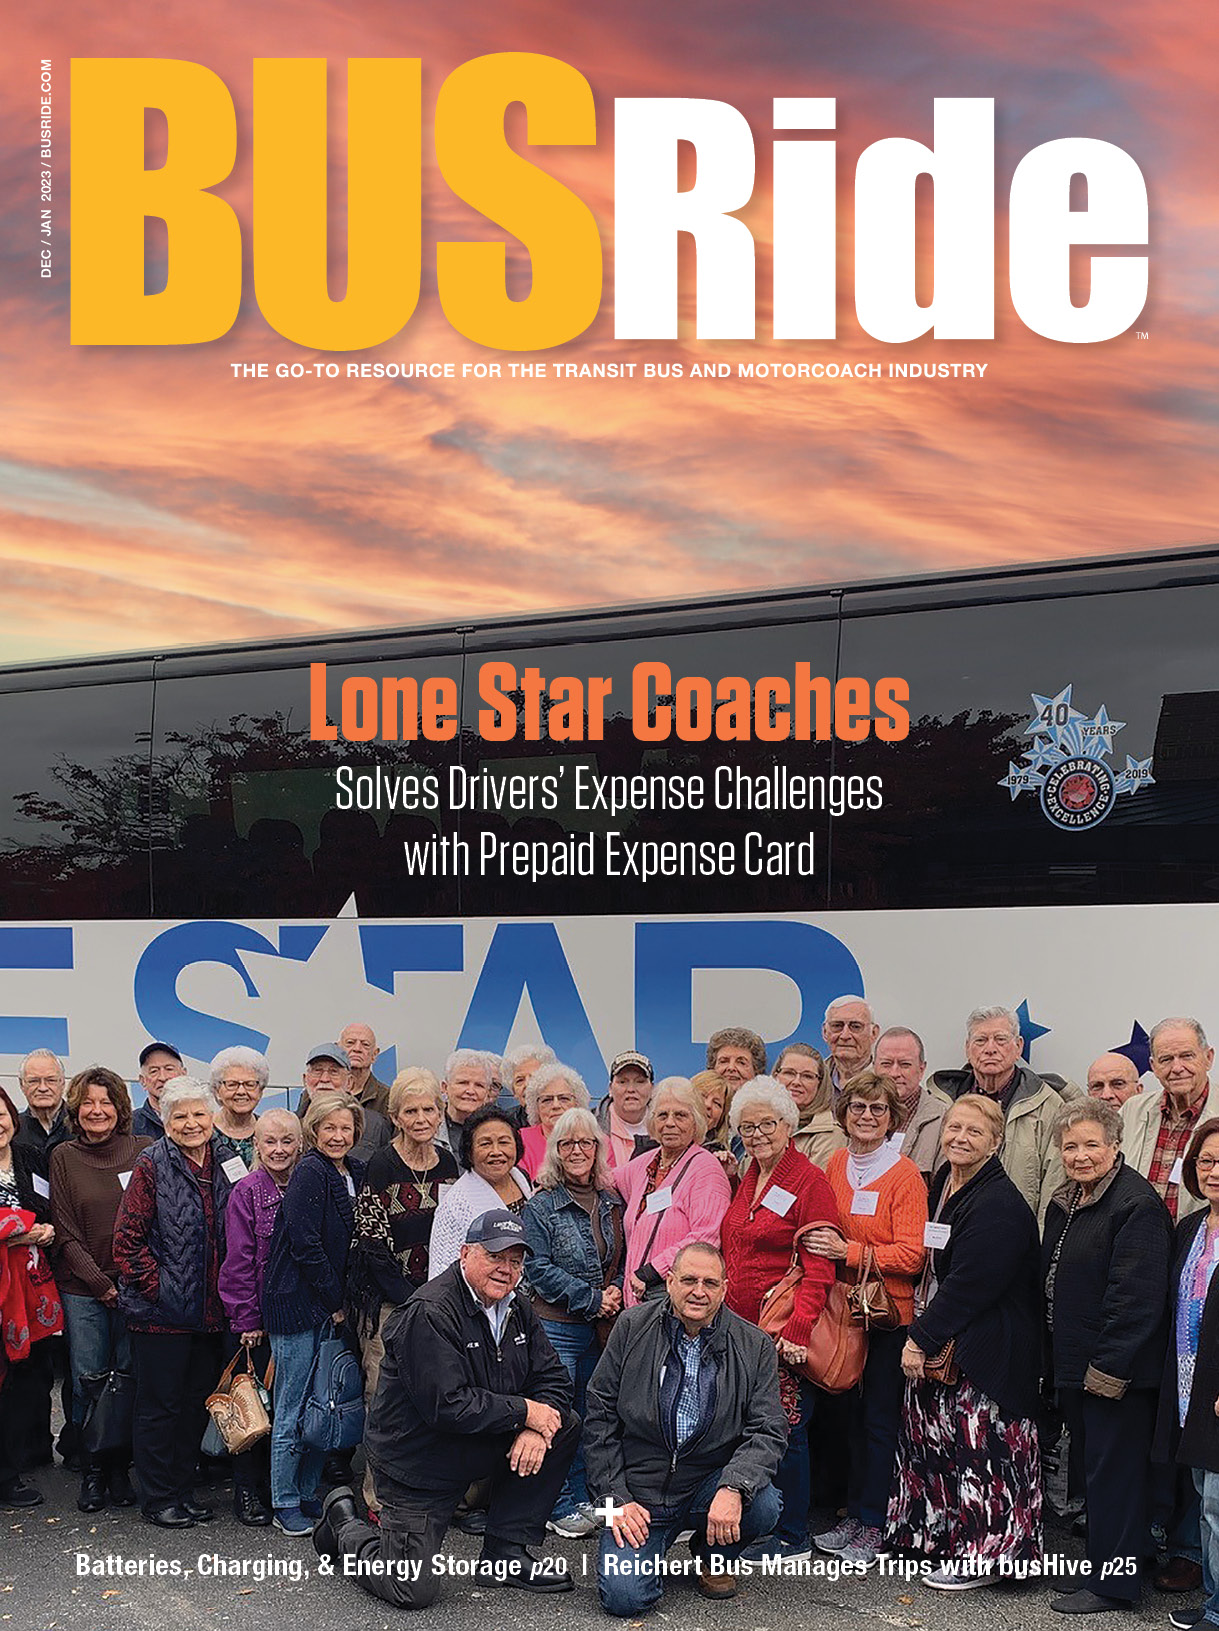 Lone Star Coaches Solves Drivers' Expense Challenges with Prepaid Expense Cards